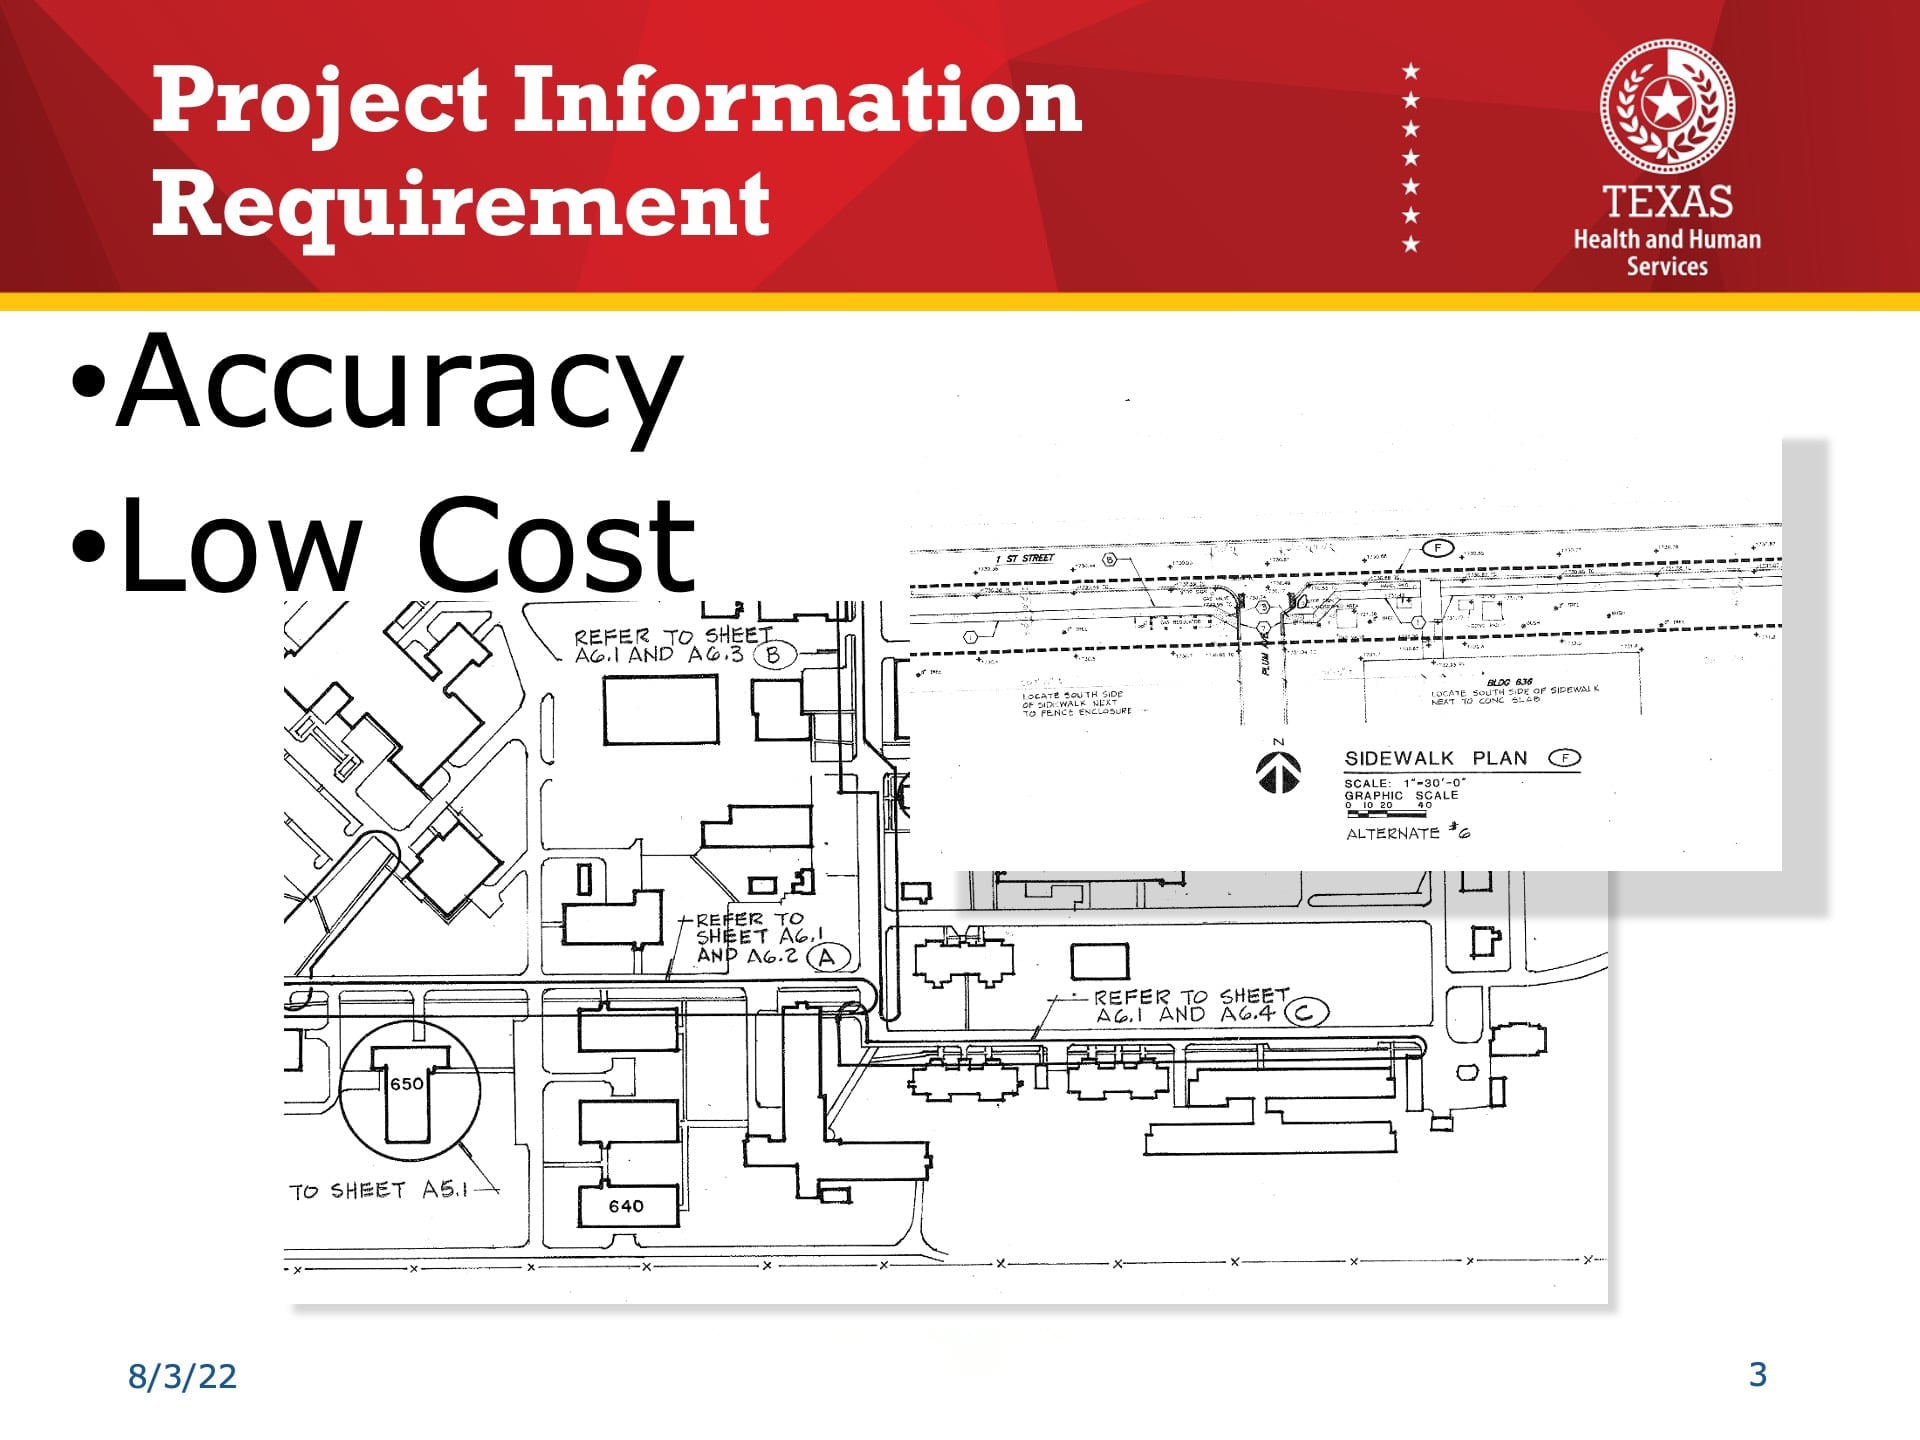 Esri UC 2022 Slide Reading: "Project Information Requirement: Accuracy, Low Cost." Photos of CAD drawings are on the slide.